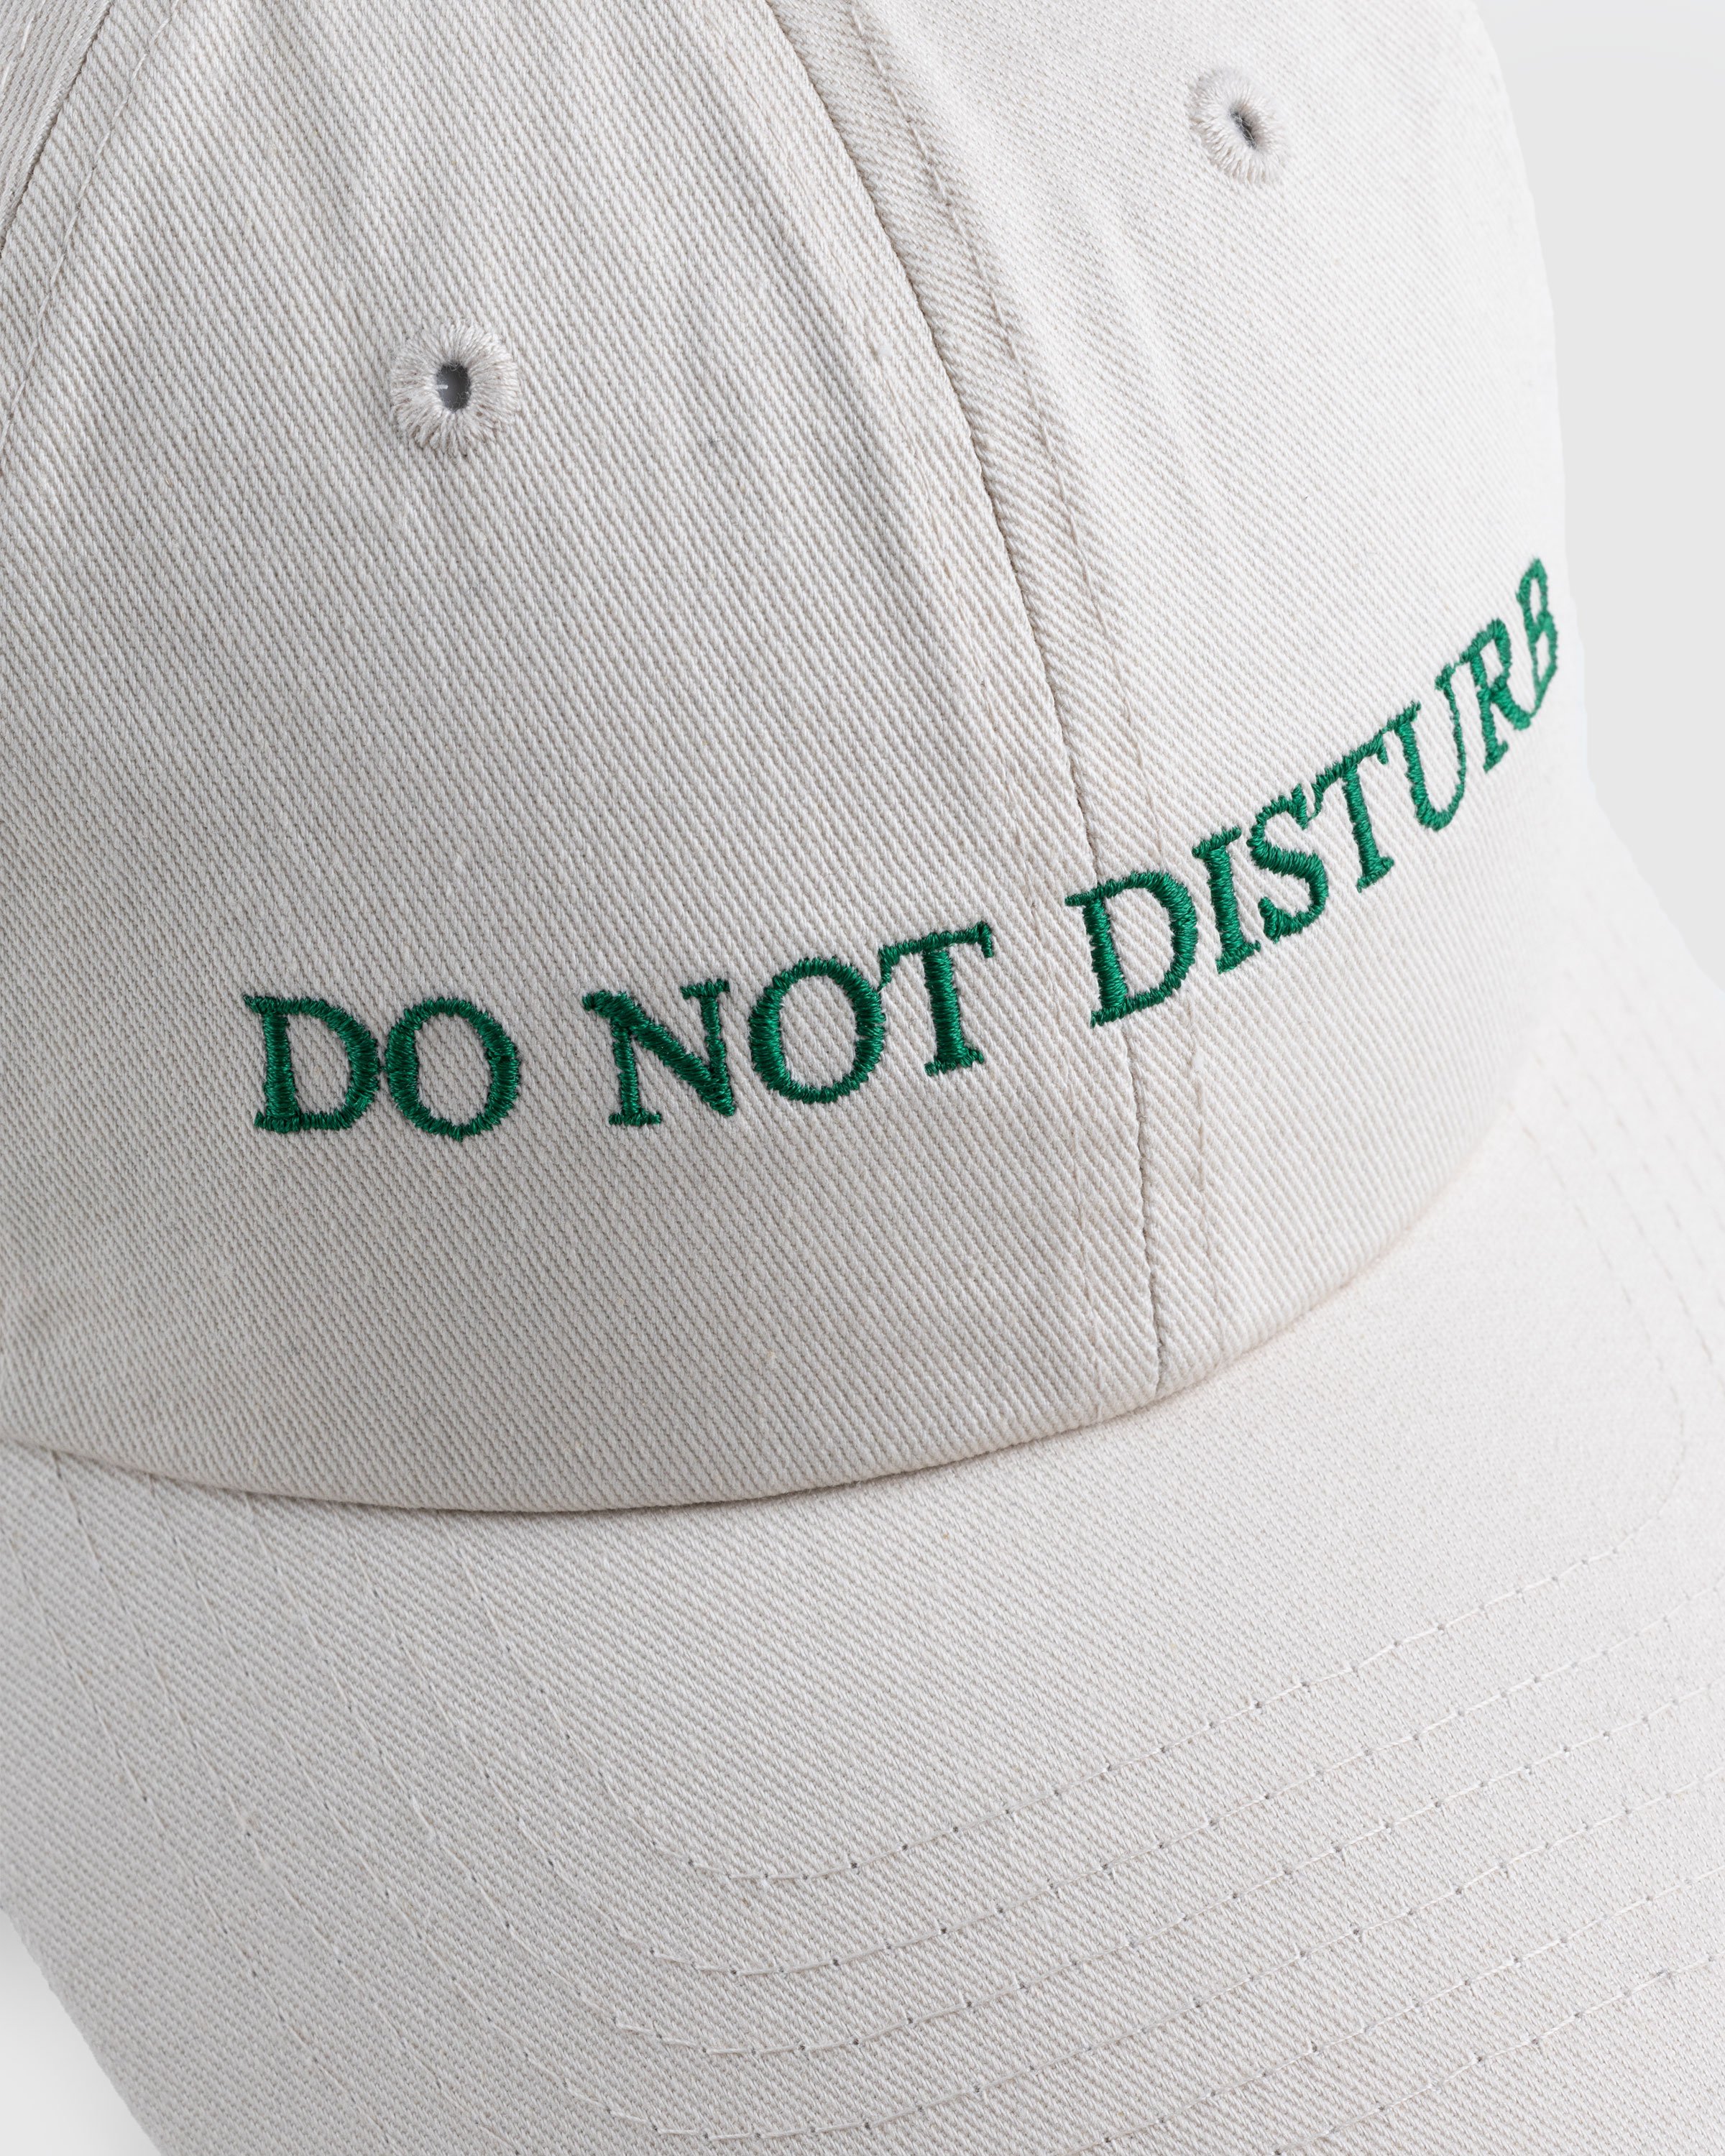 HO HO COCO - DO NOT DISTURB KHAKI X FOREST - Accessories - Green - Image 5